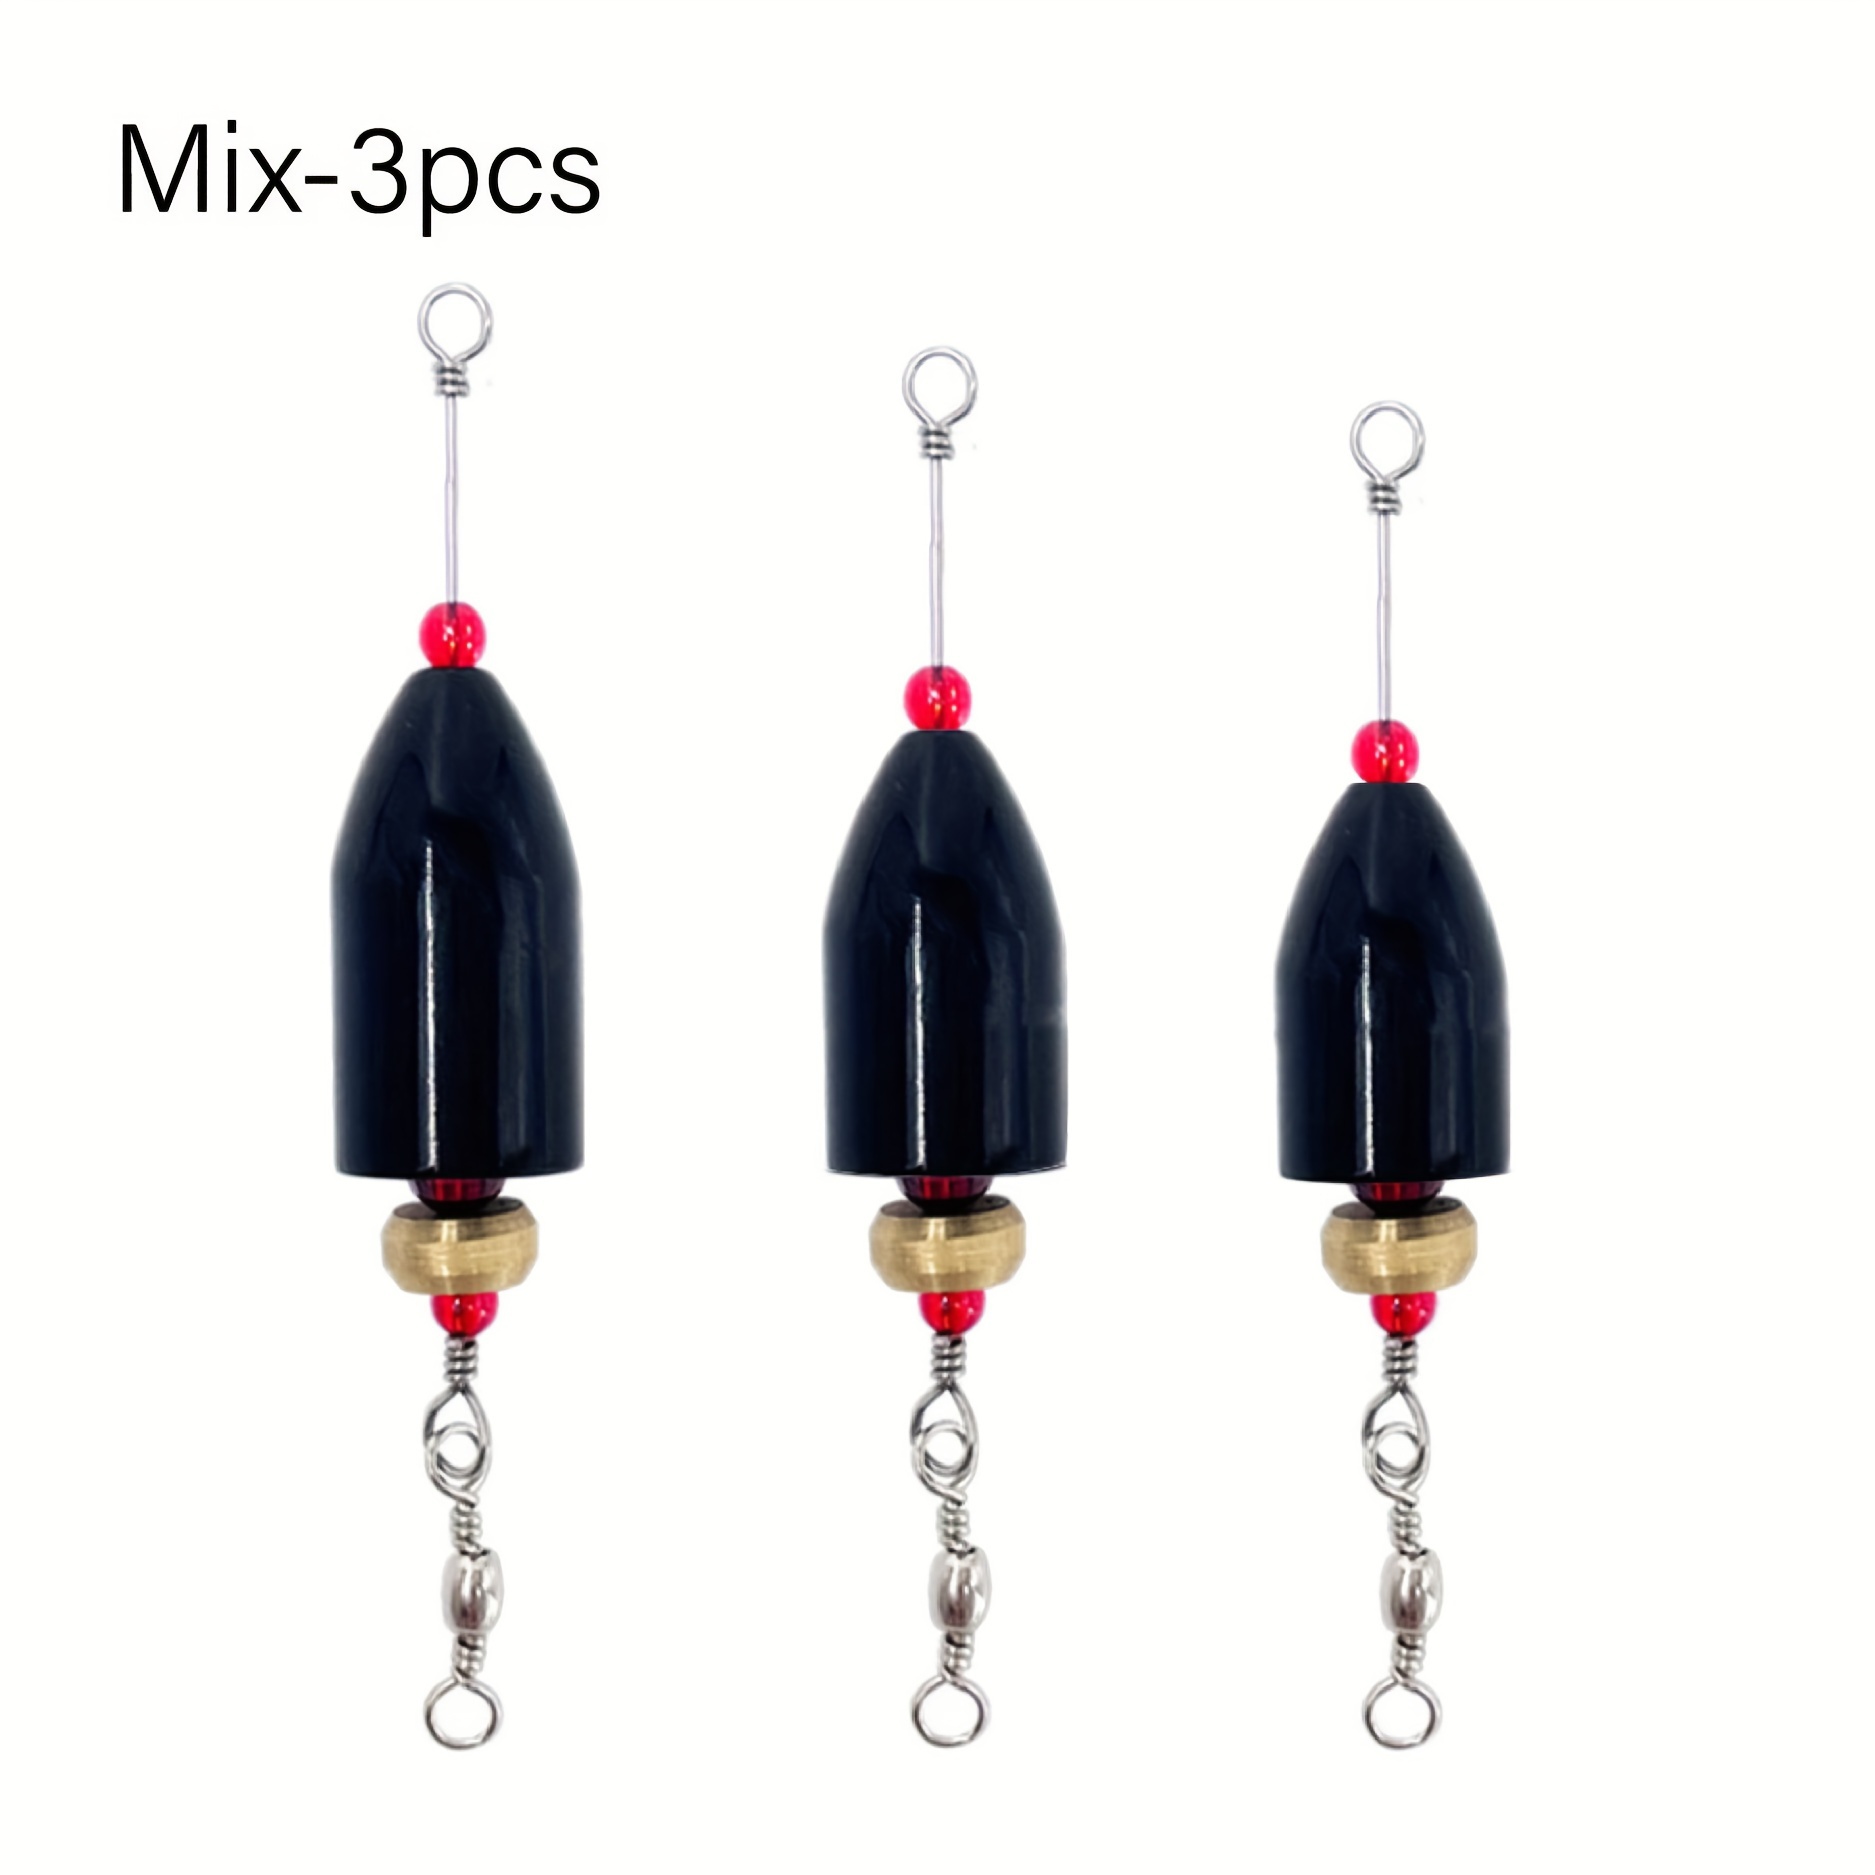 Carolina Fishing Rigs CRR Carolina Ready Rig,6pcs Brass Pre Rigged Carolina  Rig with Weight Beads Barrel Swivels for Bass Saltwater Freshwater 